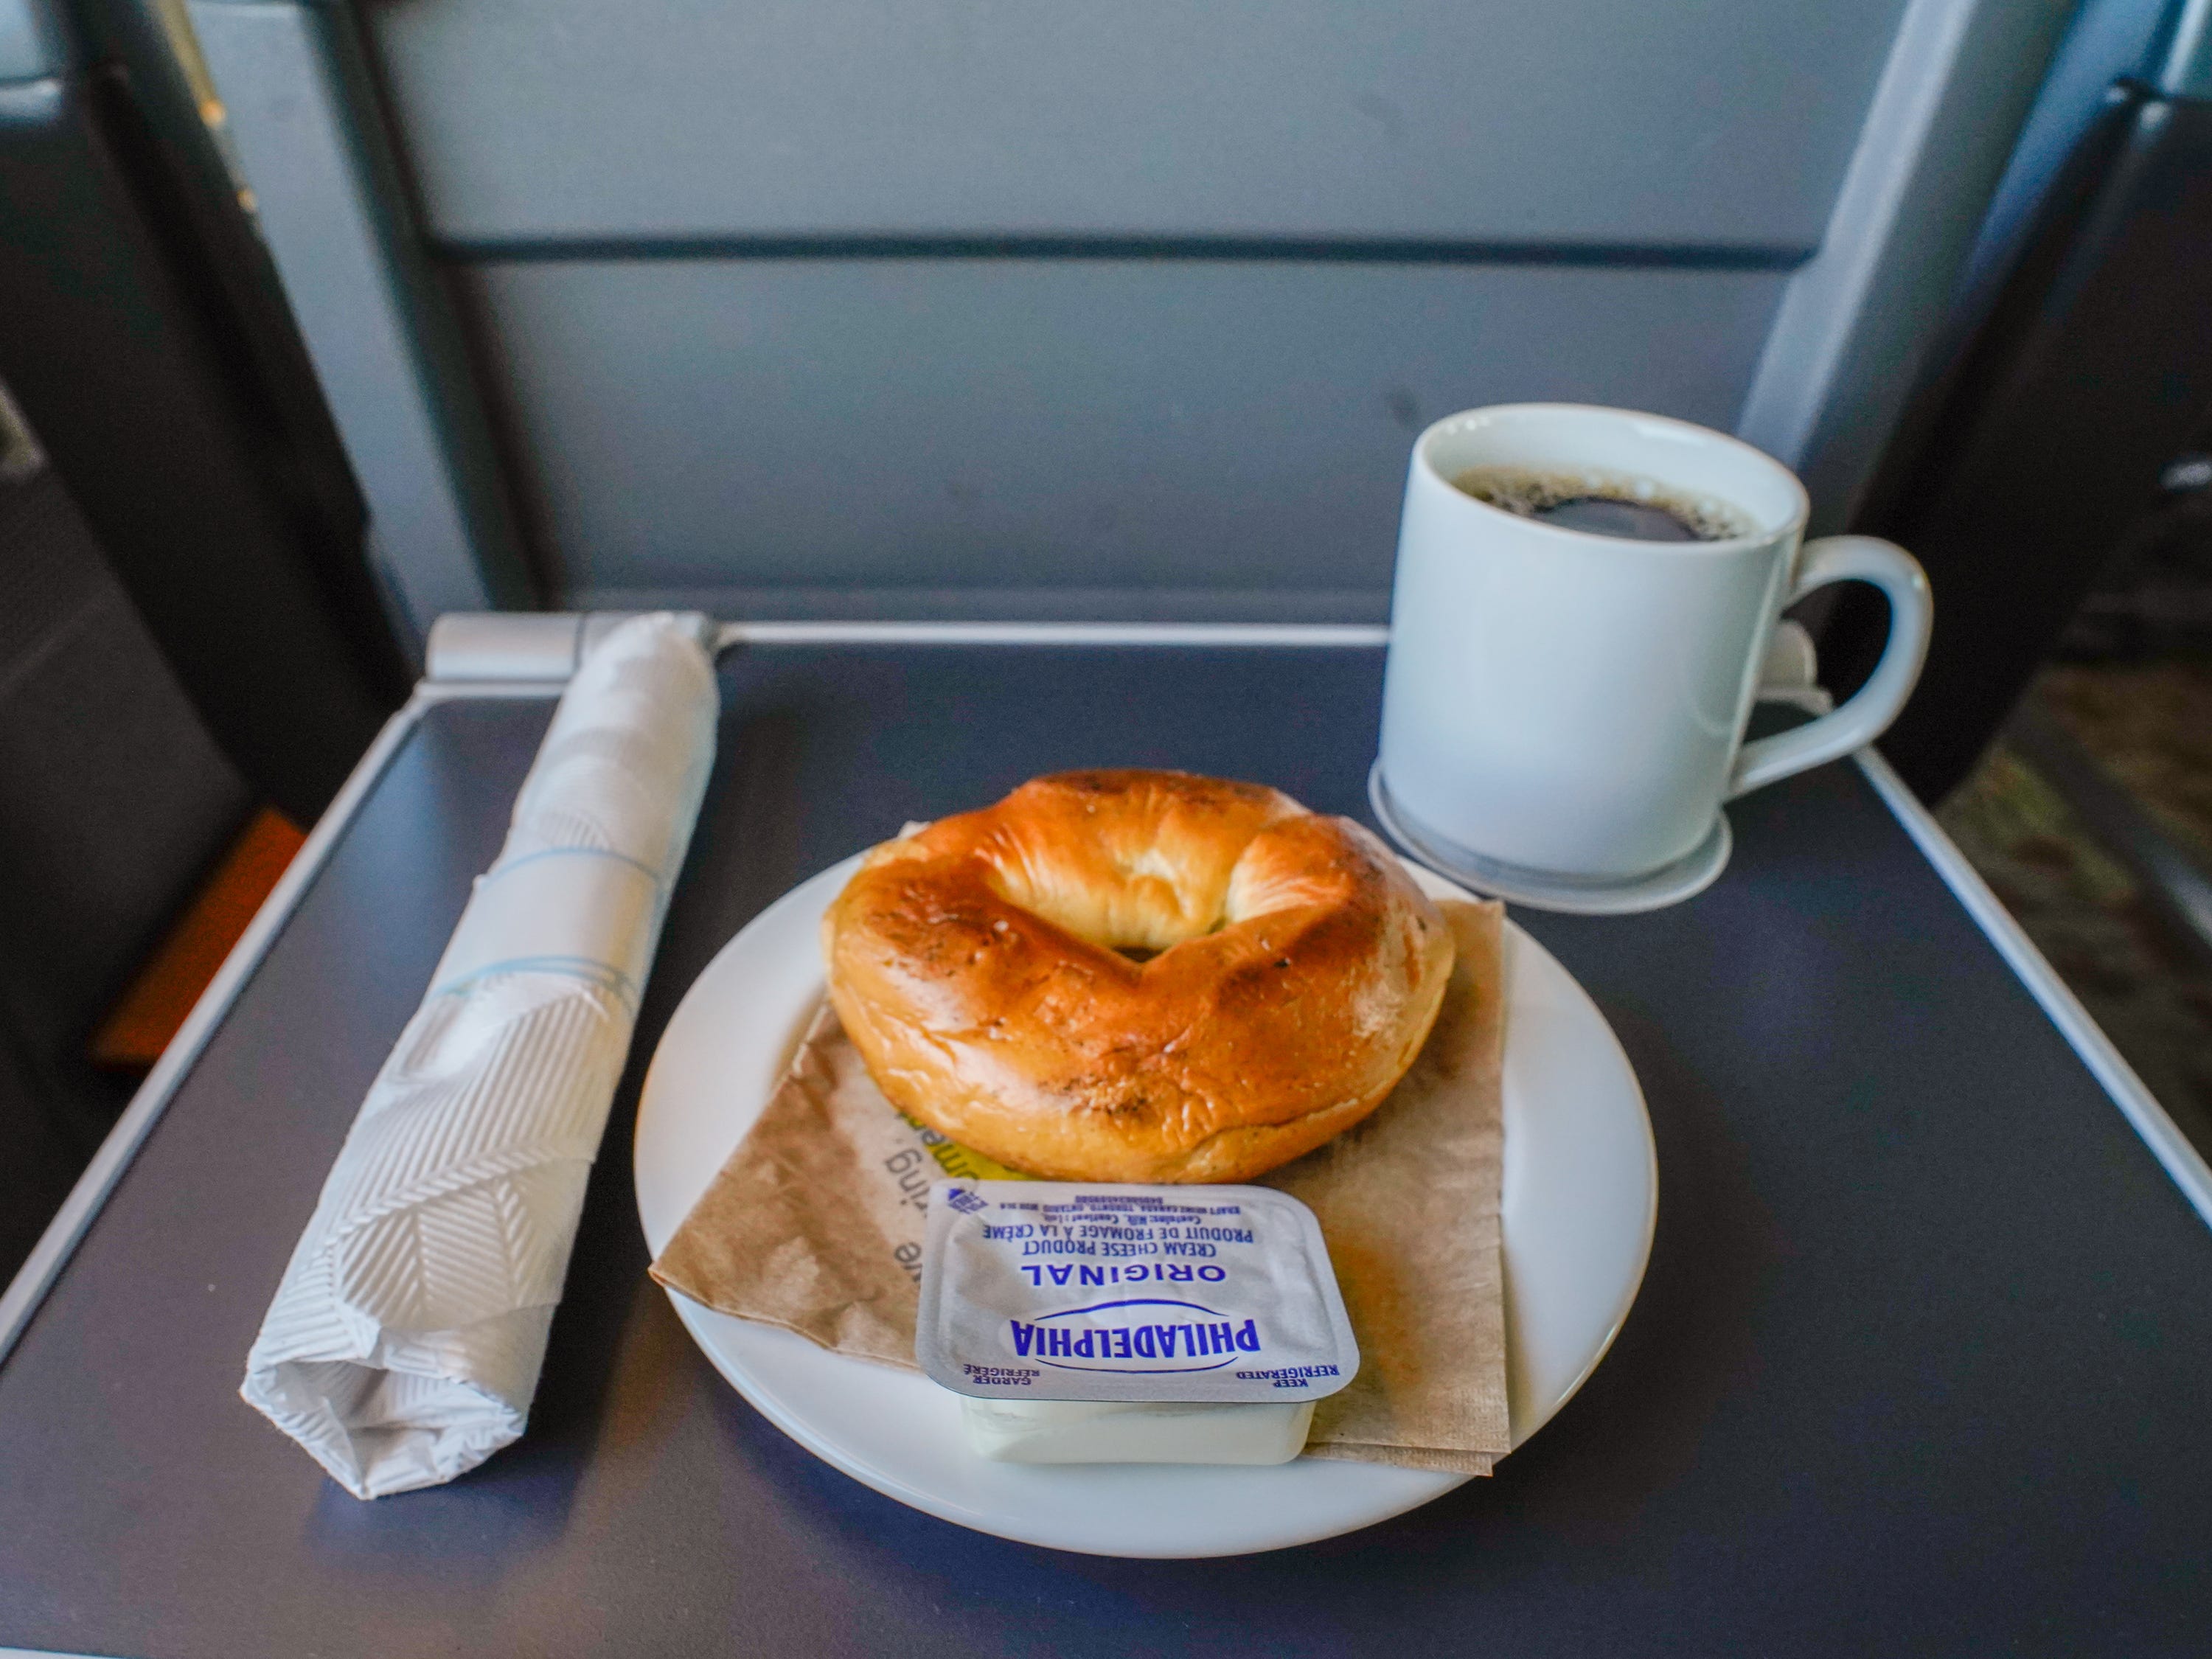 Then it was time for breakfast. Unlike Amtrak's business-class fares, Via Rail's ticket comes with complimentary meals brought to my seat. The train served a warm bagel with cream cheese. It was no New York bagel, I thought, but it was decent and filled me up.